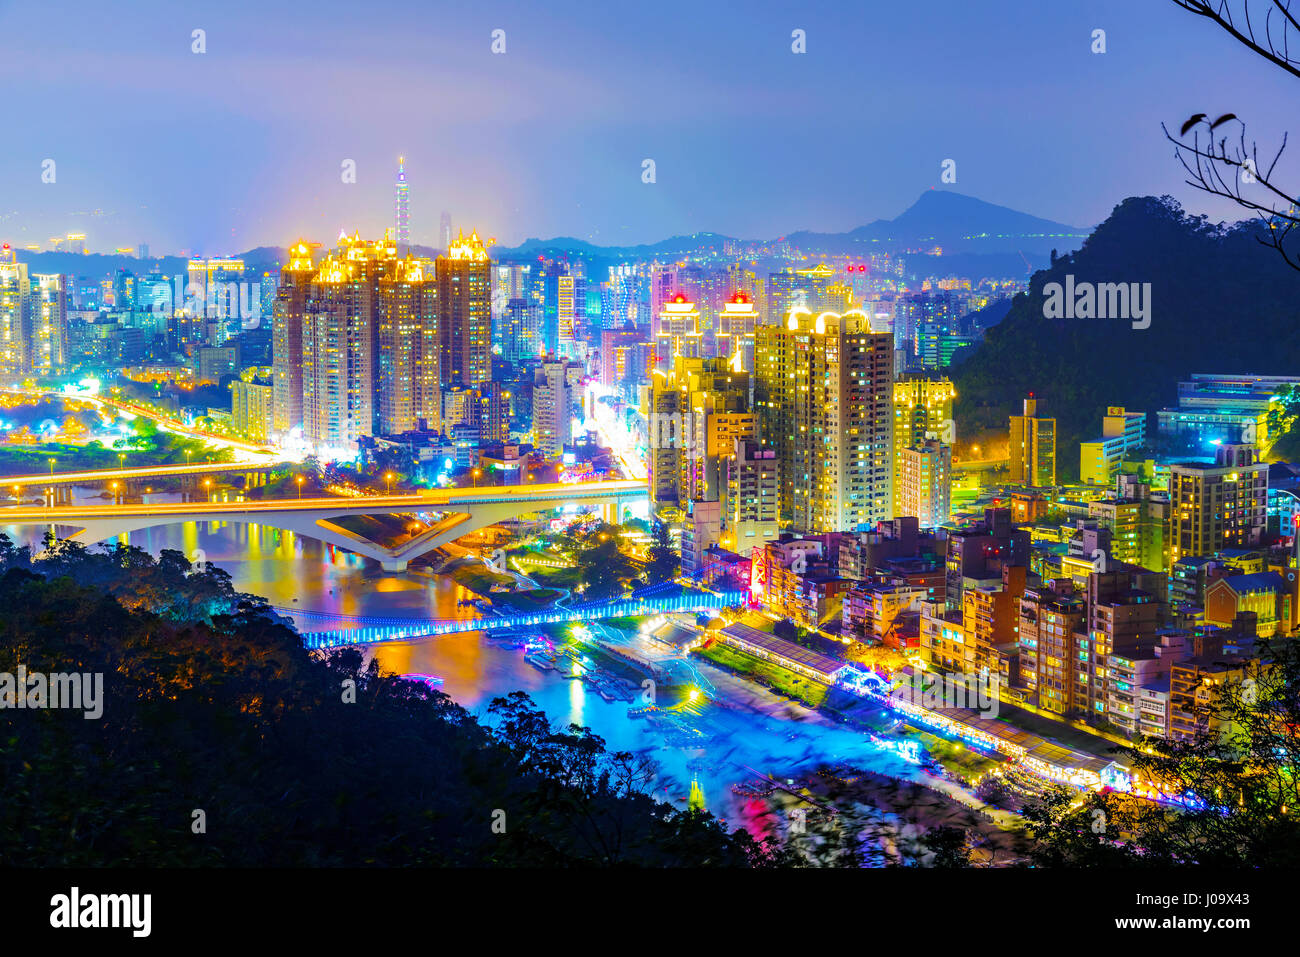 View of New Taipei city buildings at night from a mountain in Xindian Stock Photo